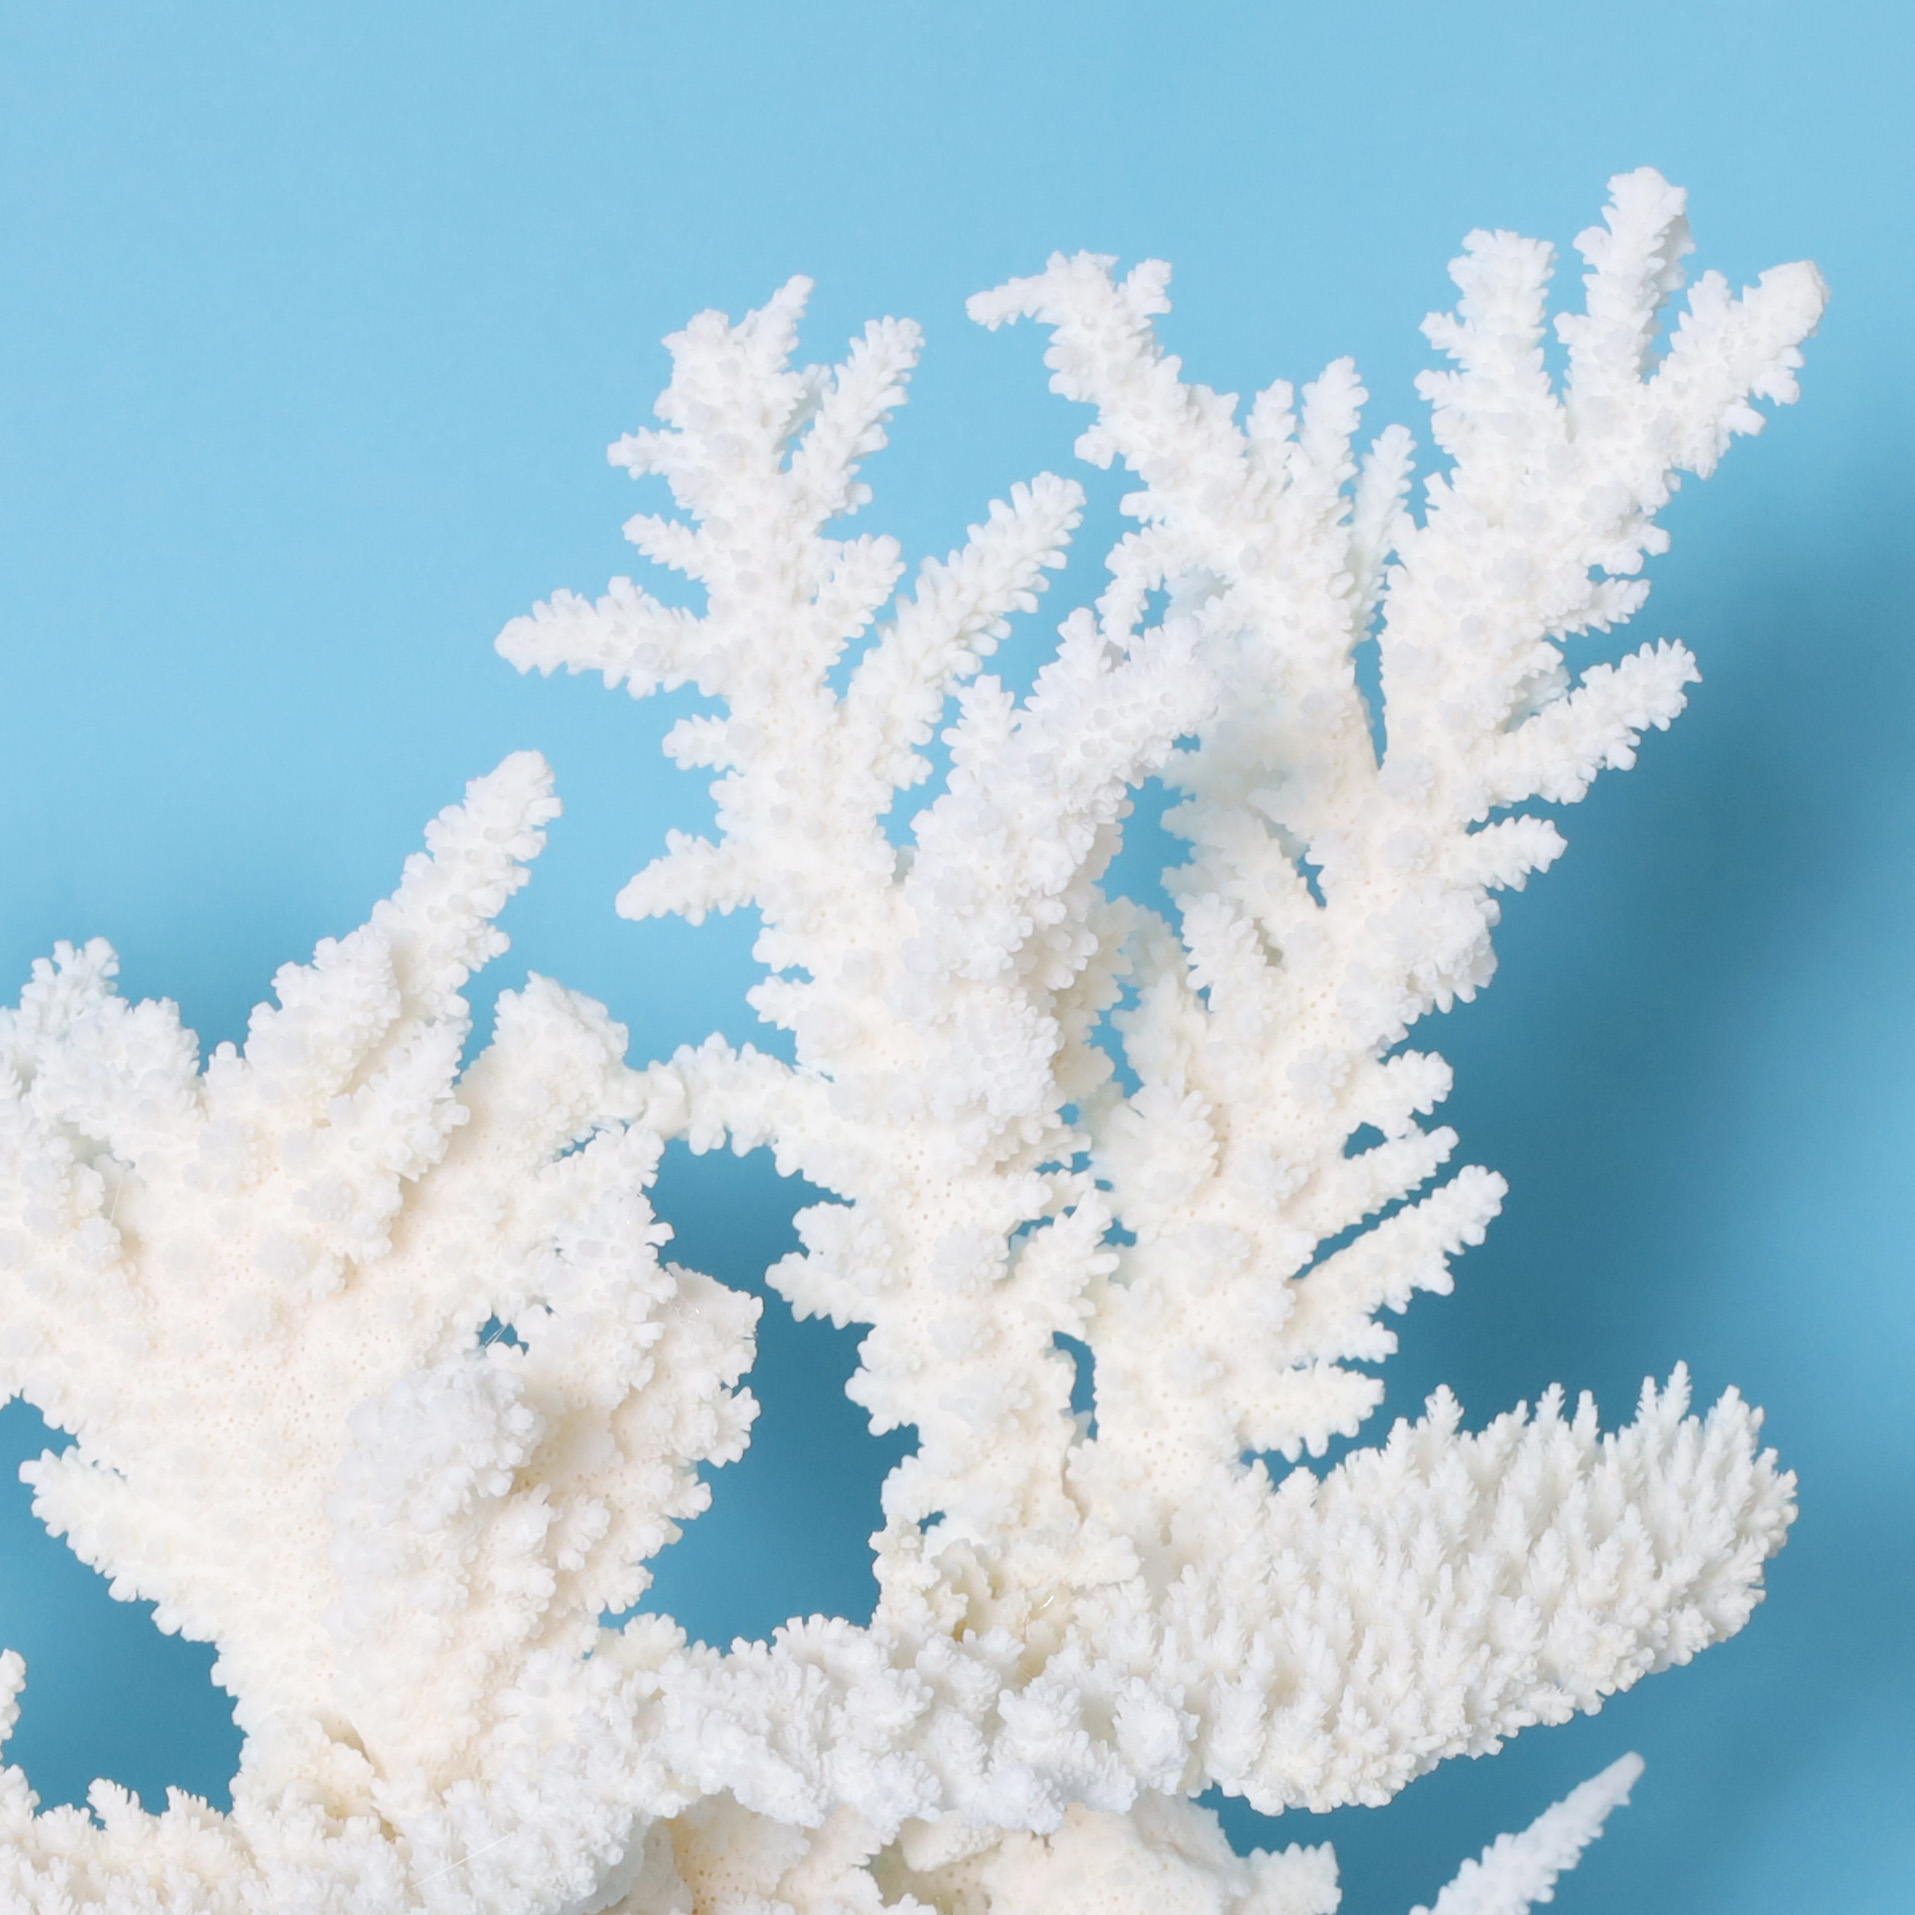 White Coral Sculpture on a Lucite Base